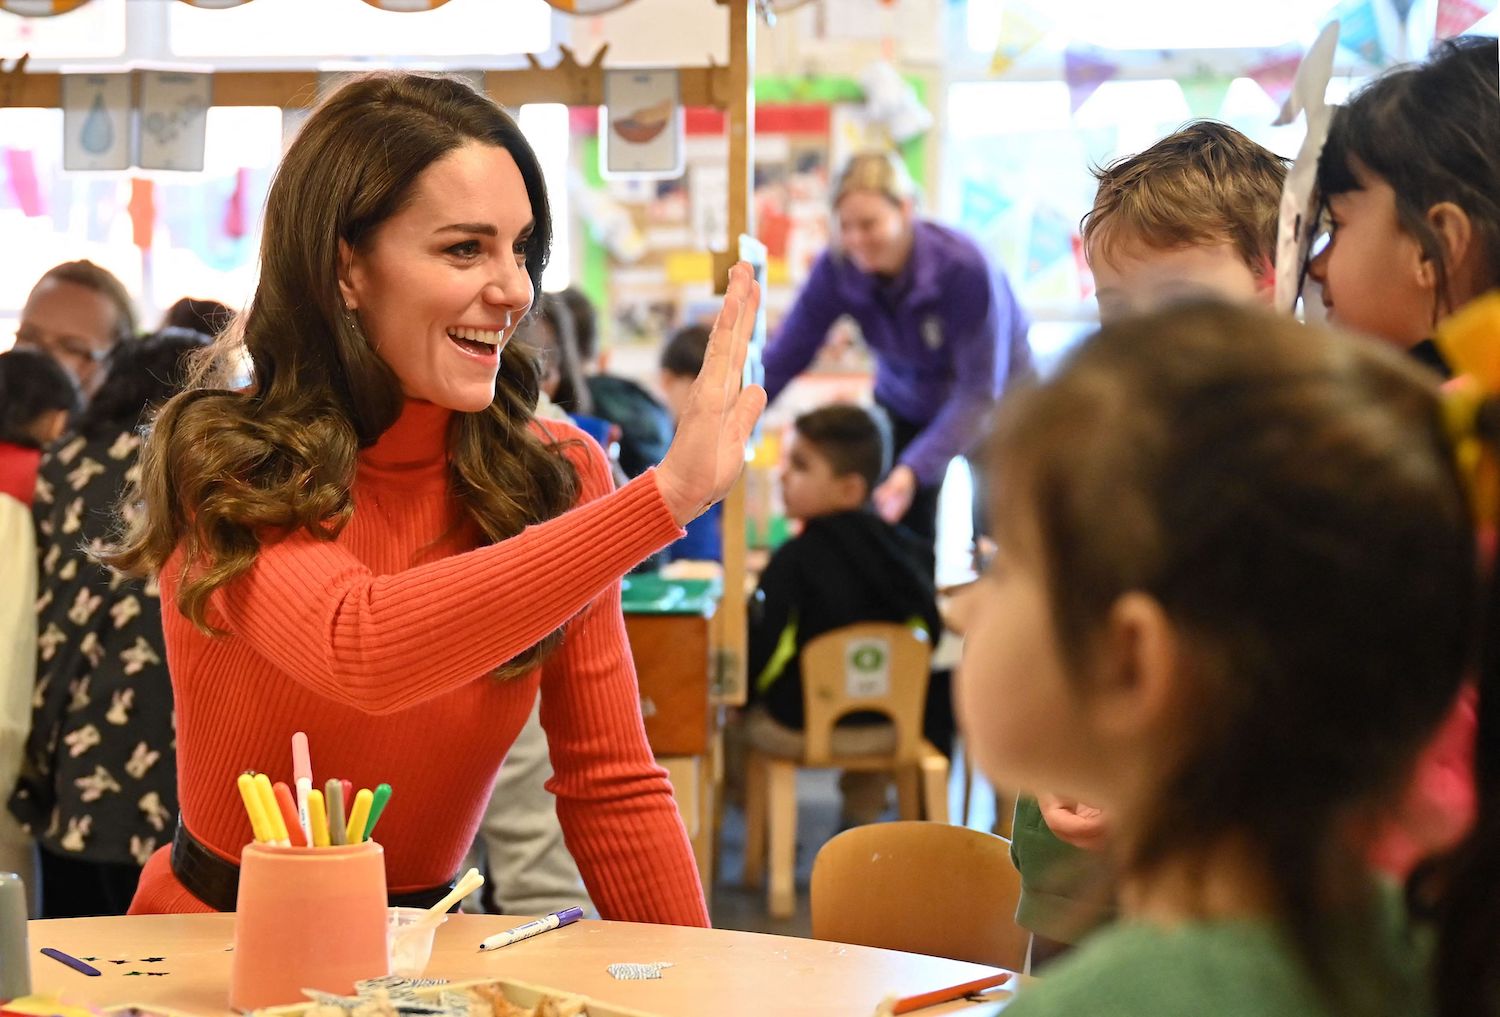 Kate Middleton body language at nursery school engagment shows she isn't fazed by Prince Harry's memoir, expert says